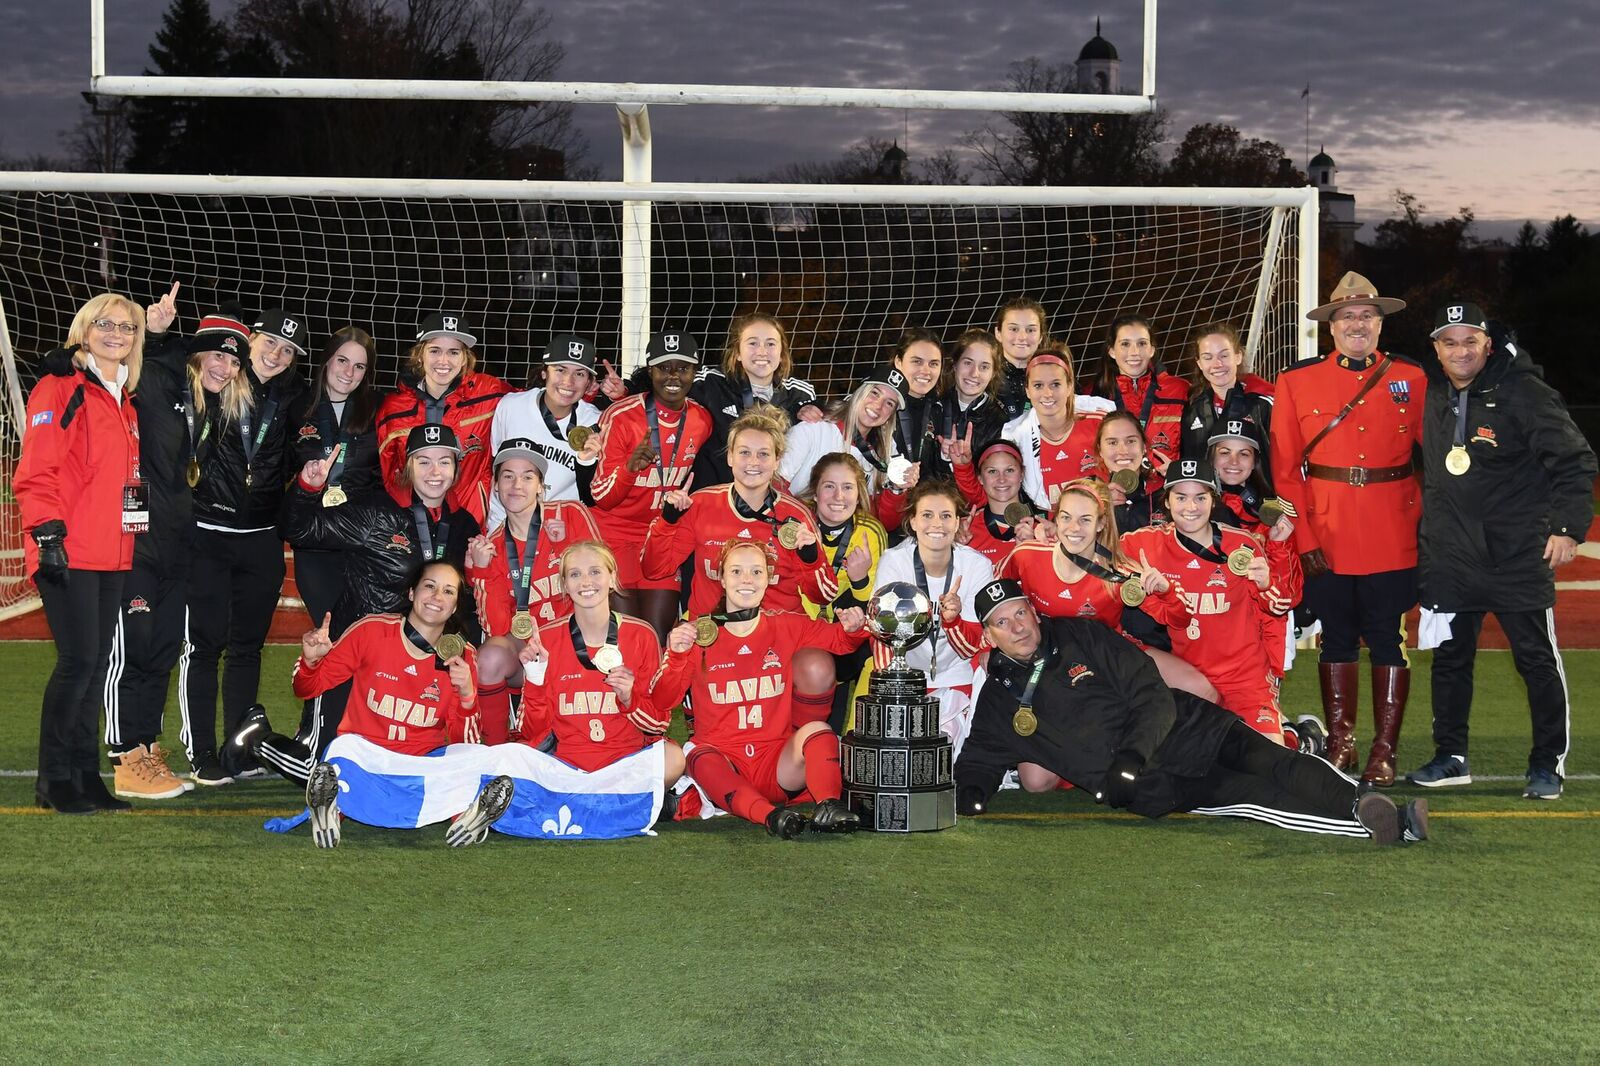 FINAL 2016 women’s soccer championship: Rouge et Or crowned women’s soccer champs after 2-1 win over UBC